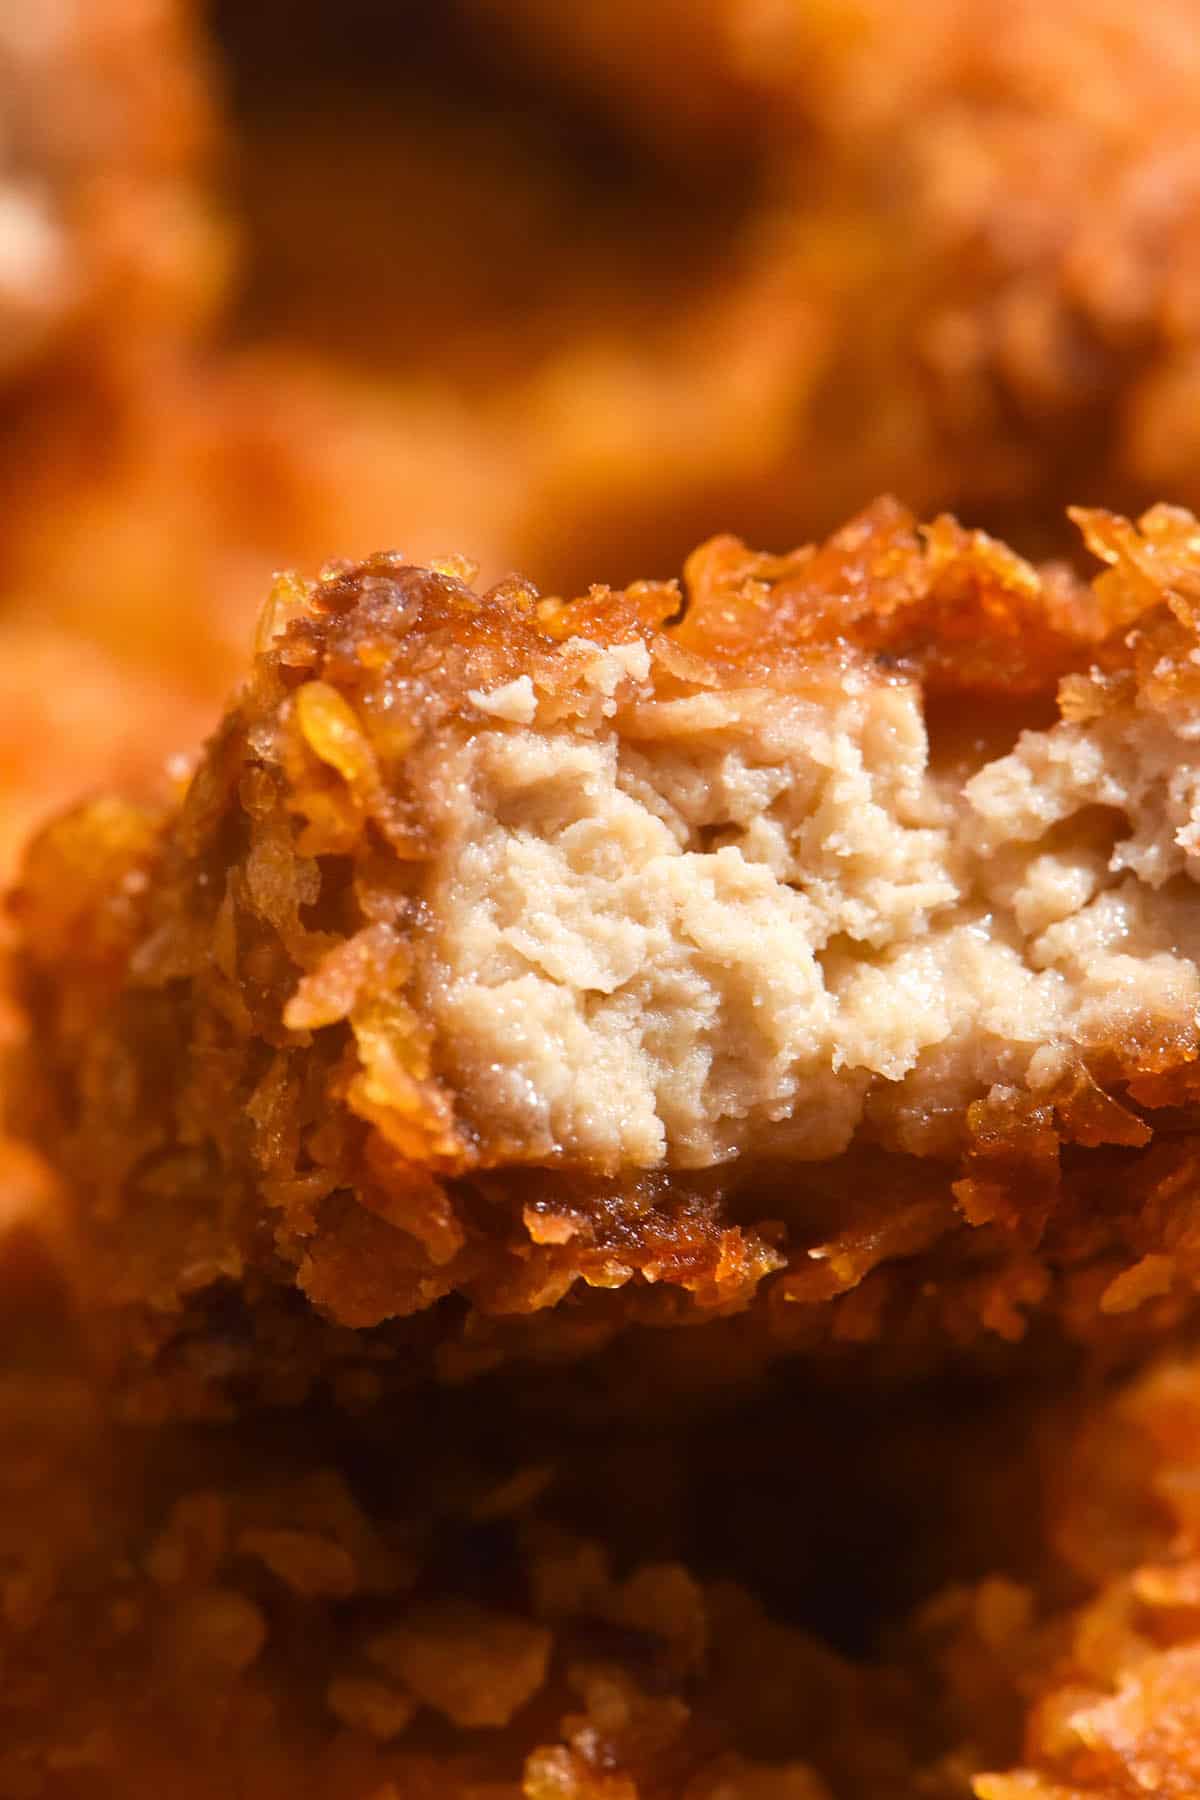 A macro close up of a gluten free tofu nugget that has been bitten into, revealing the juicy inside and the golden brown crumb